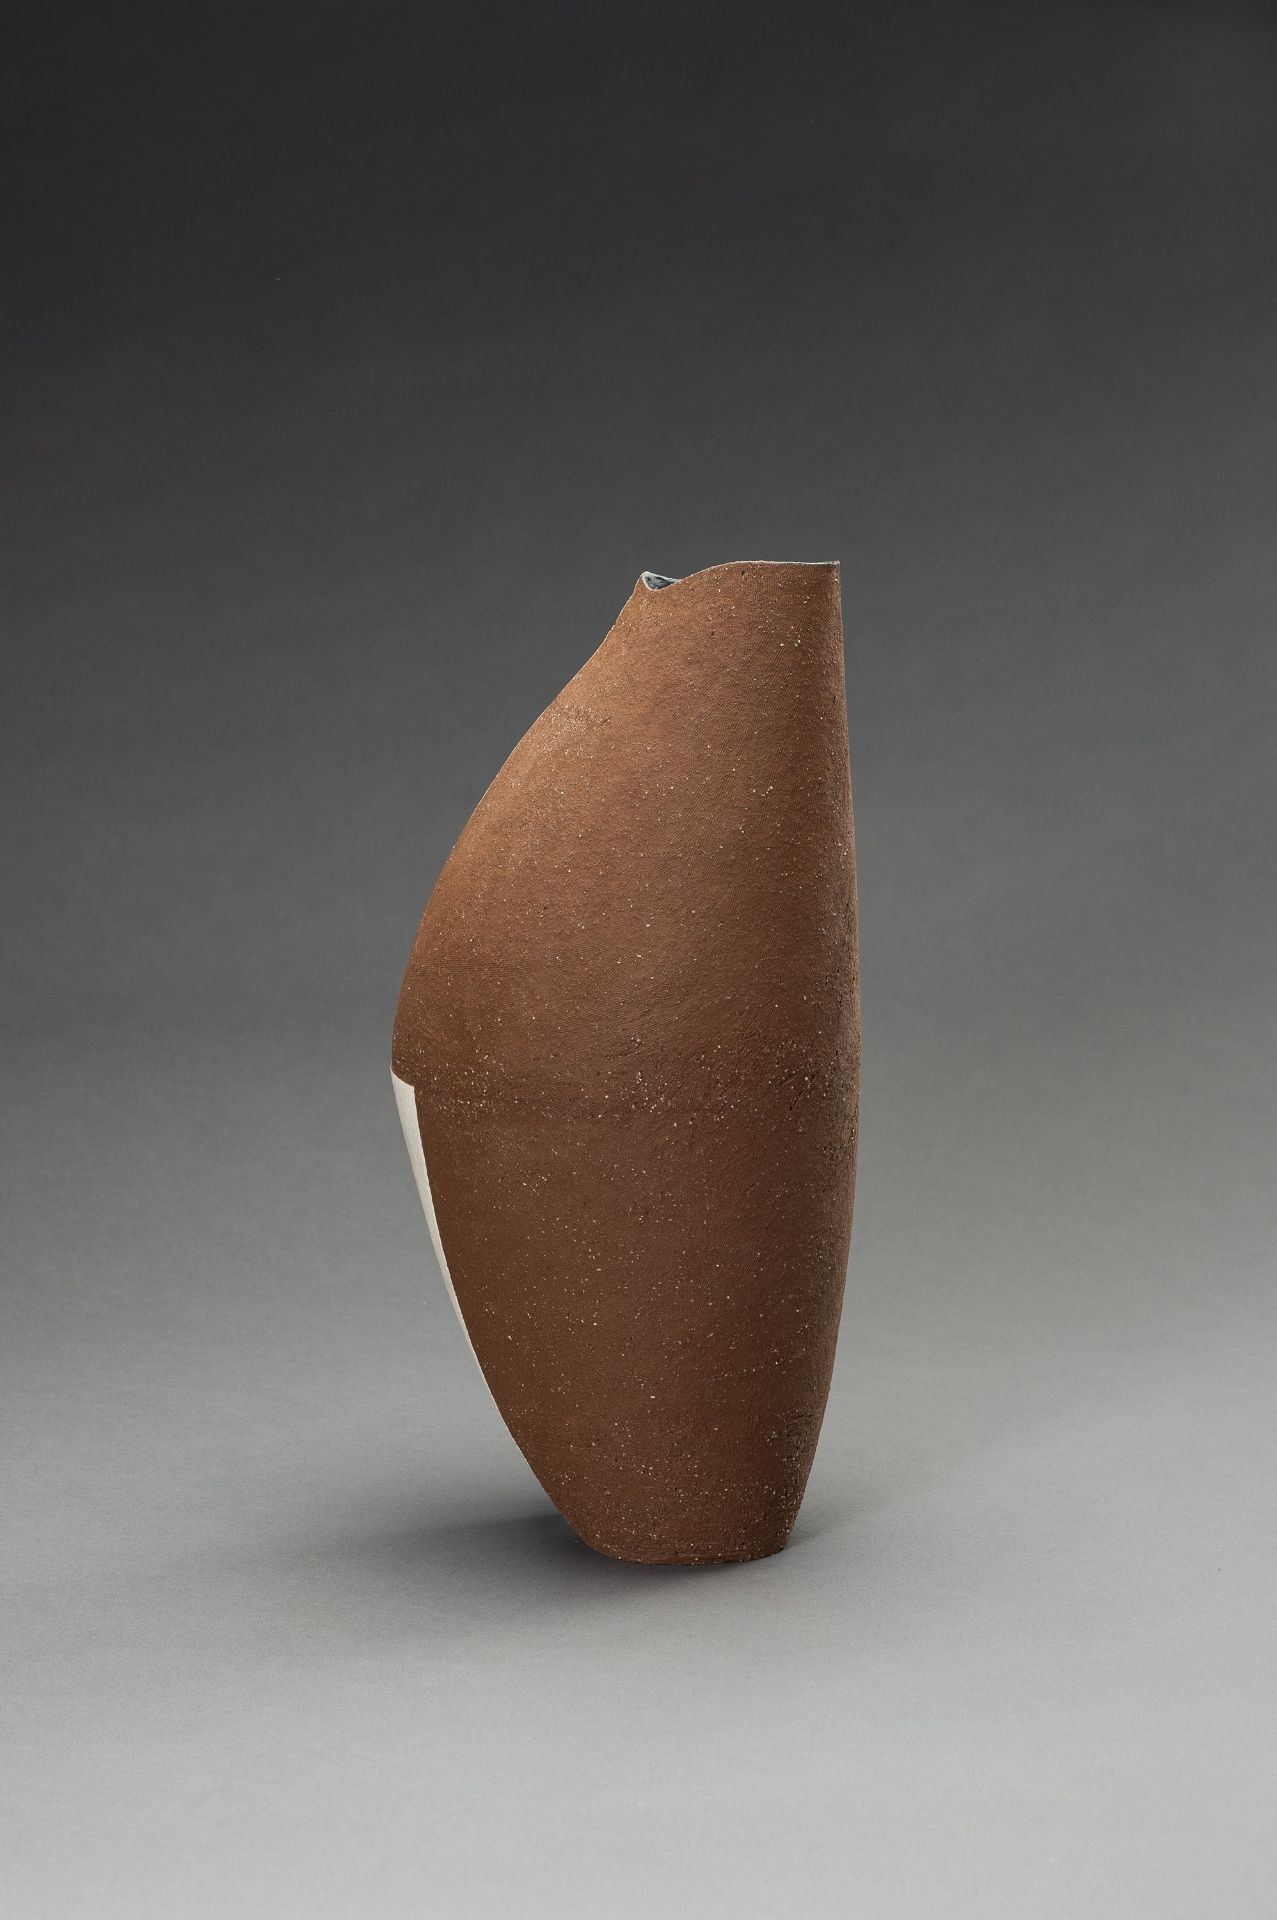 MASA TOSHI: A CONTEMPORARY LACQUERED CERAMIC VASE - Image 6 of 11